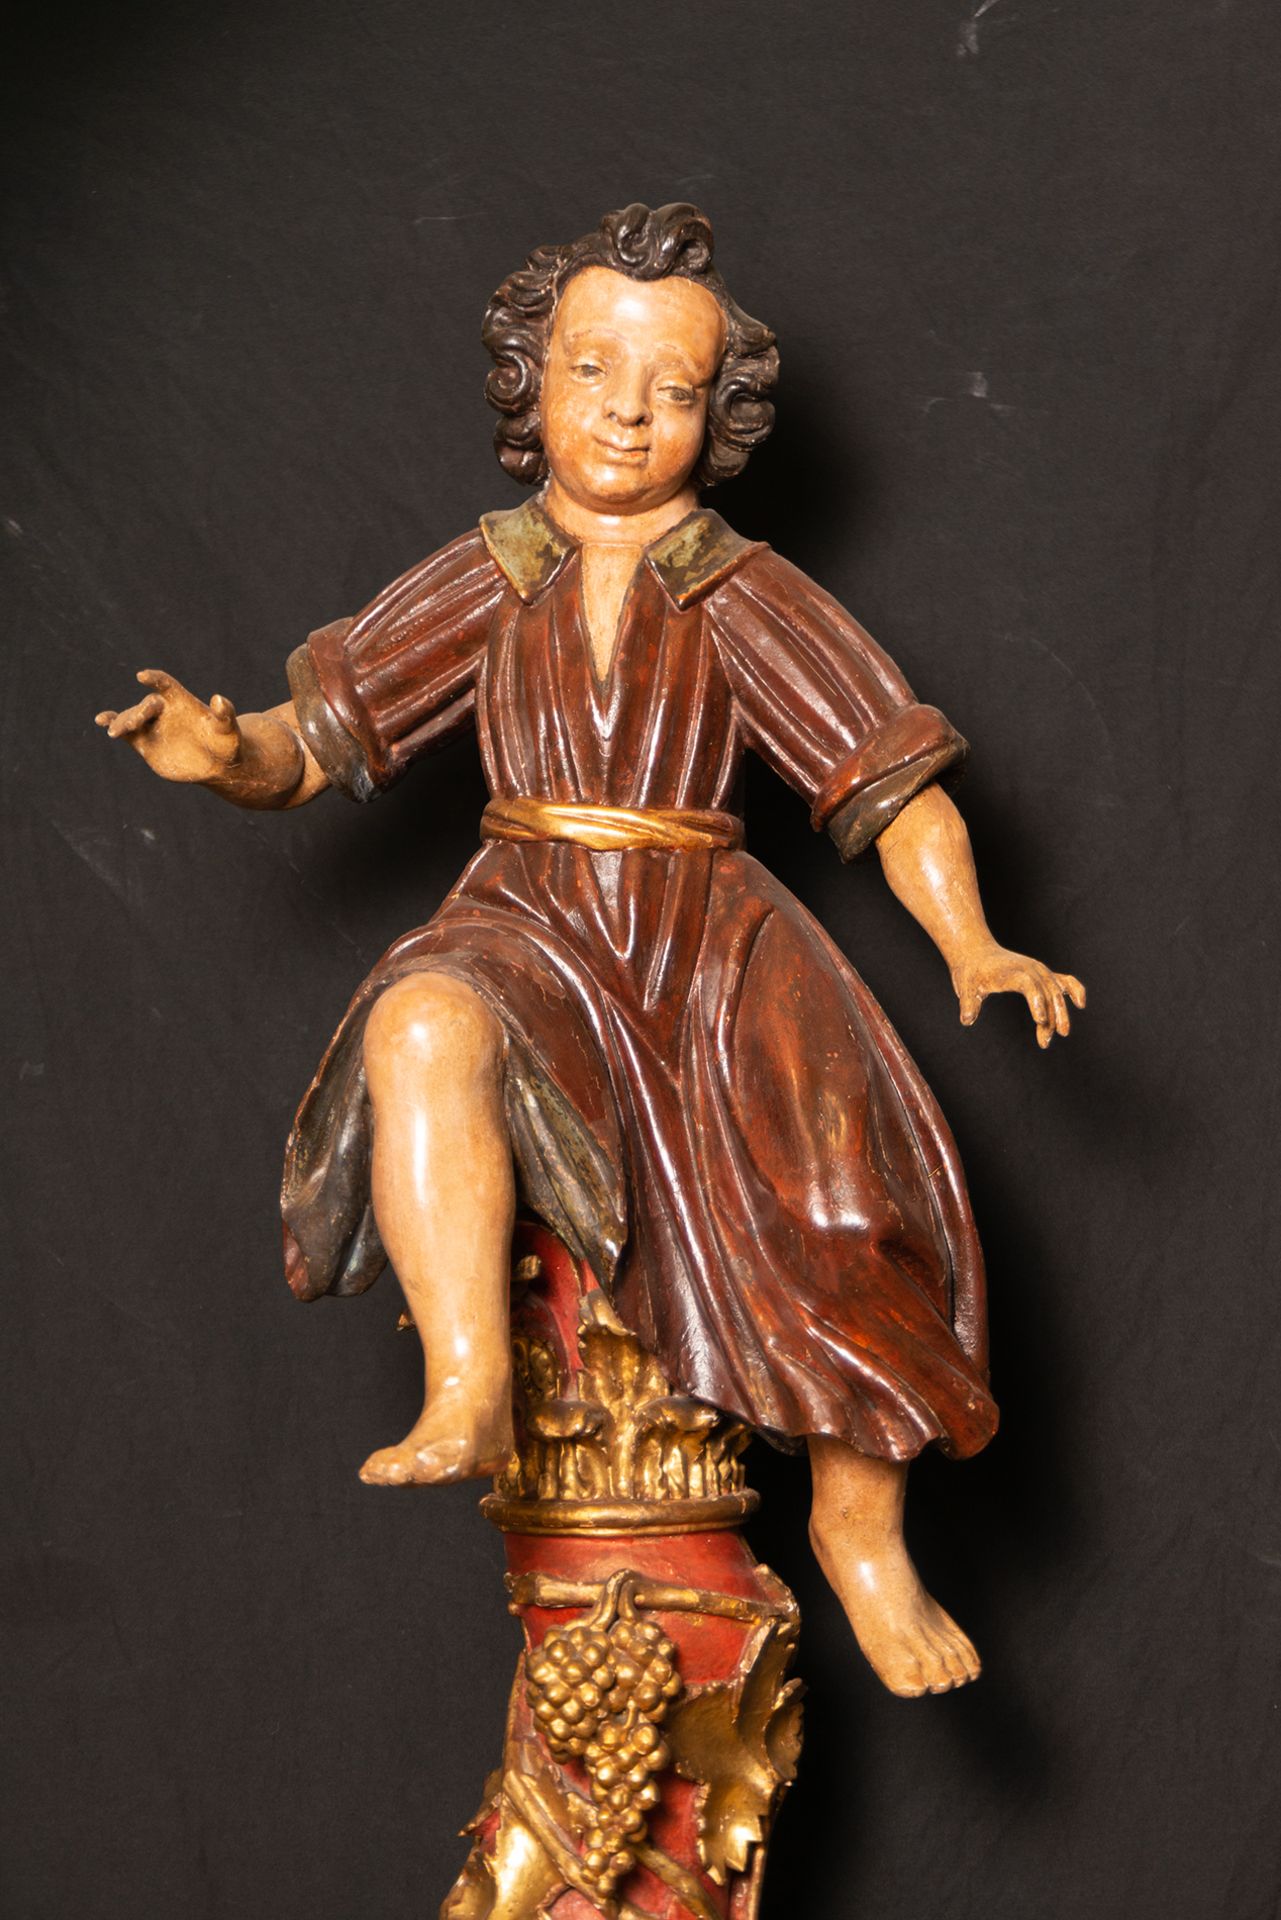 Child Jesus seated on the column, Sevillian school of the 17th - 18th centuries - Image 2 of 7